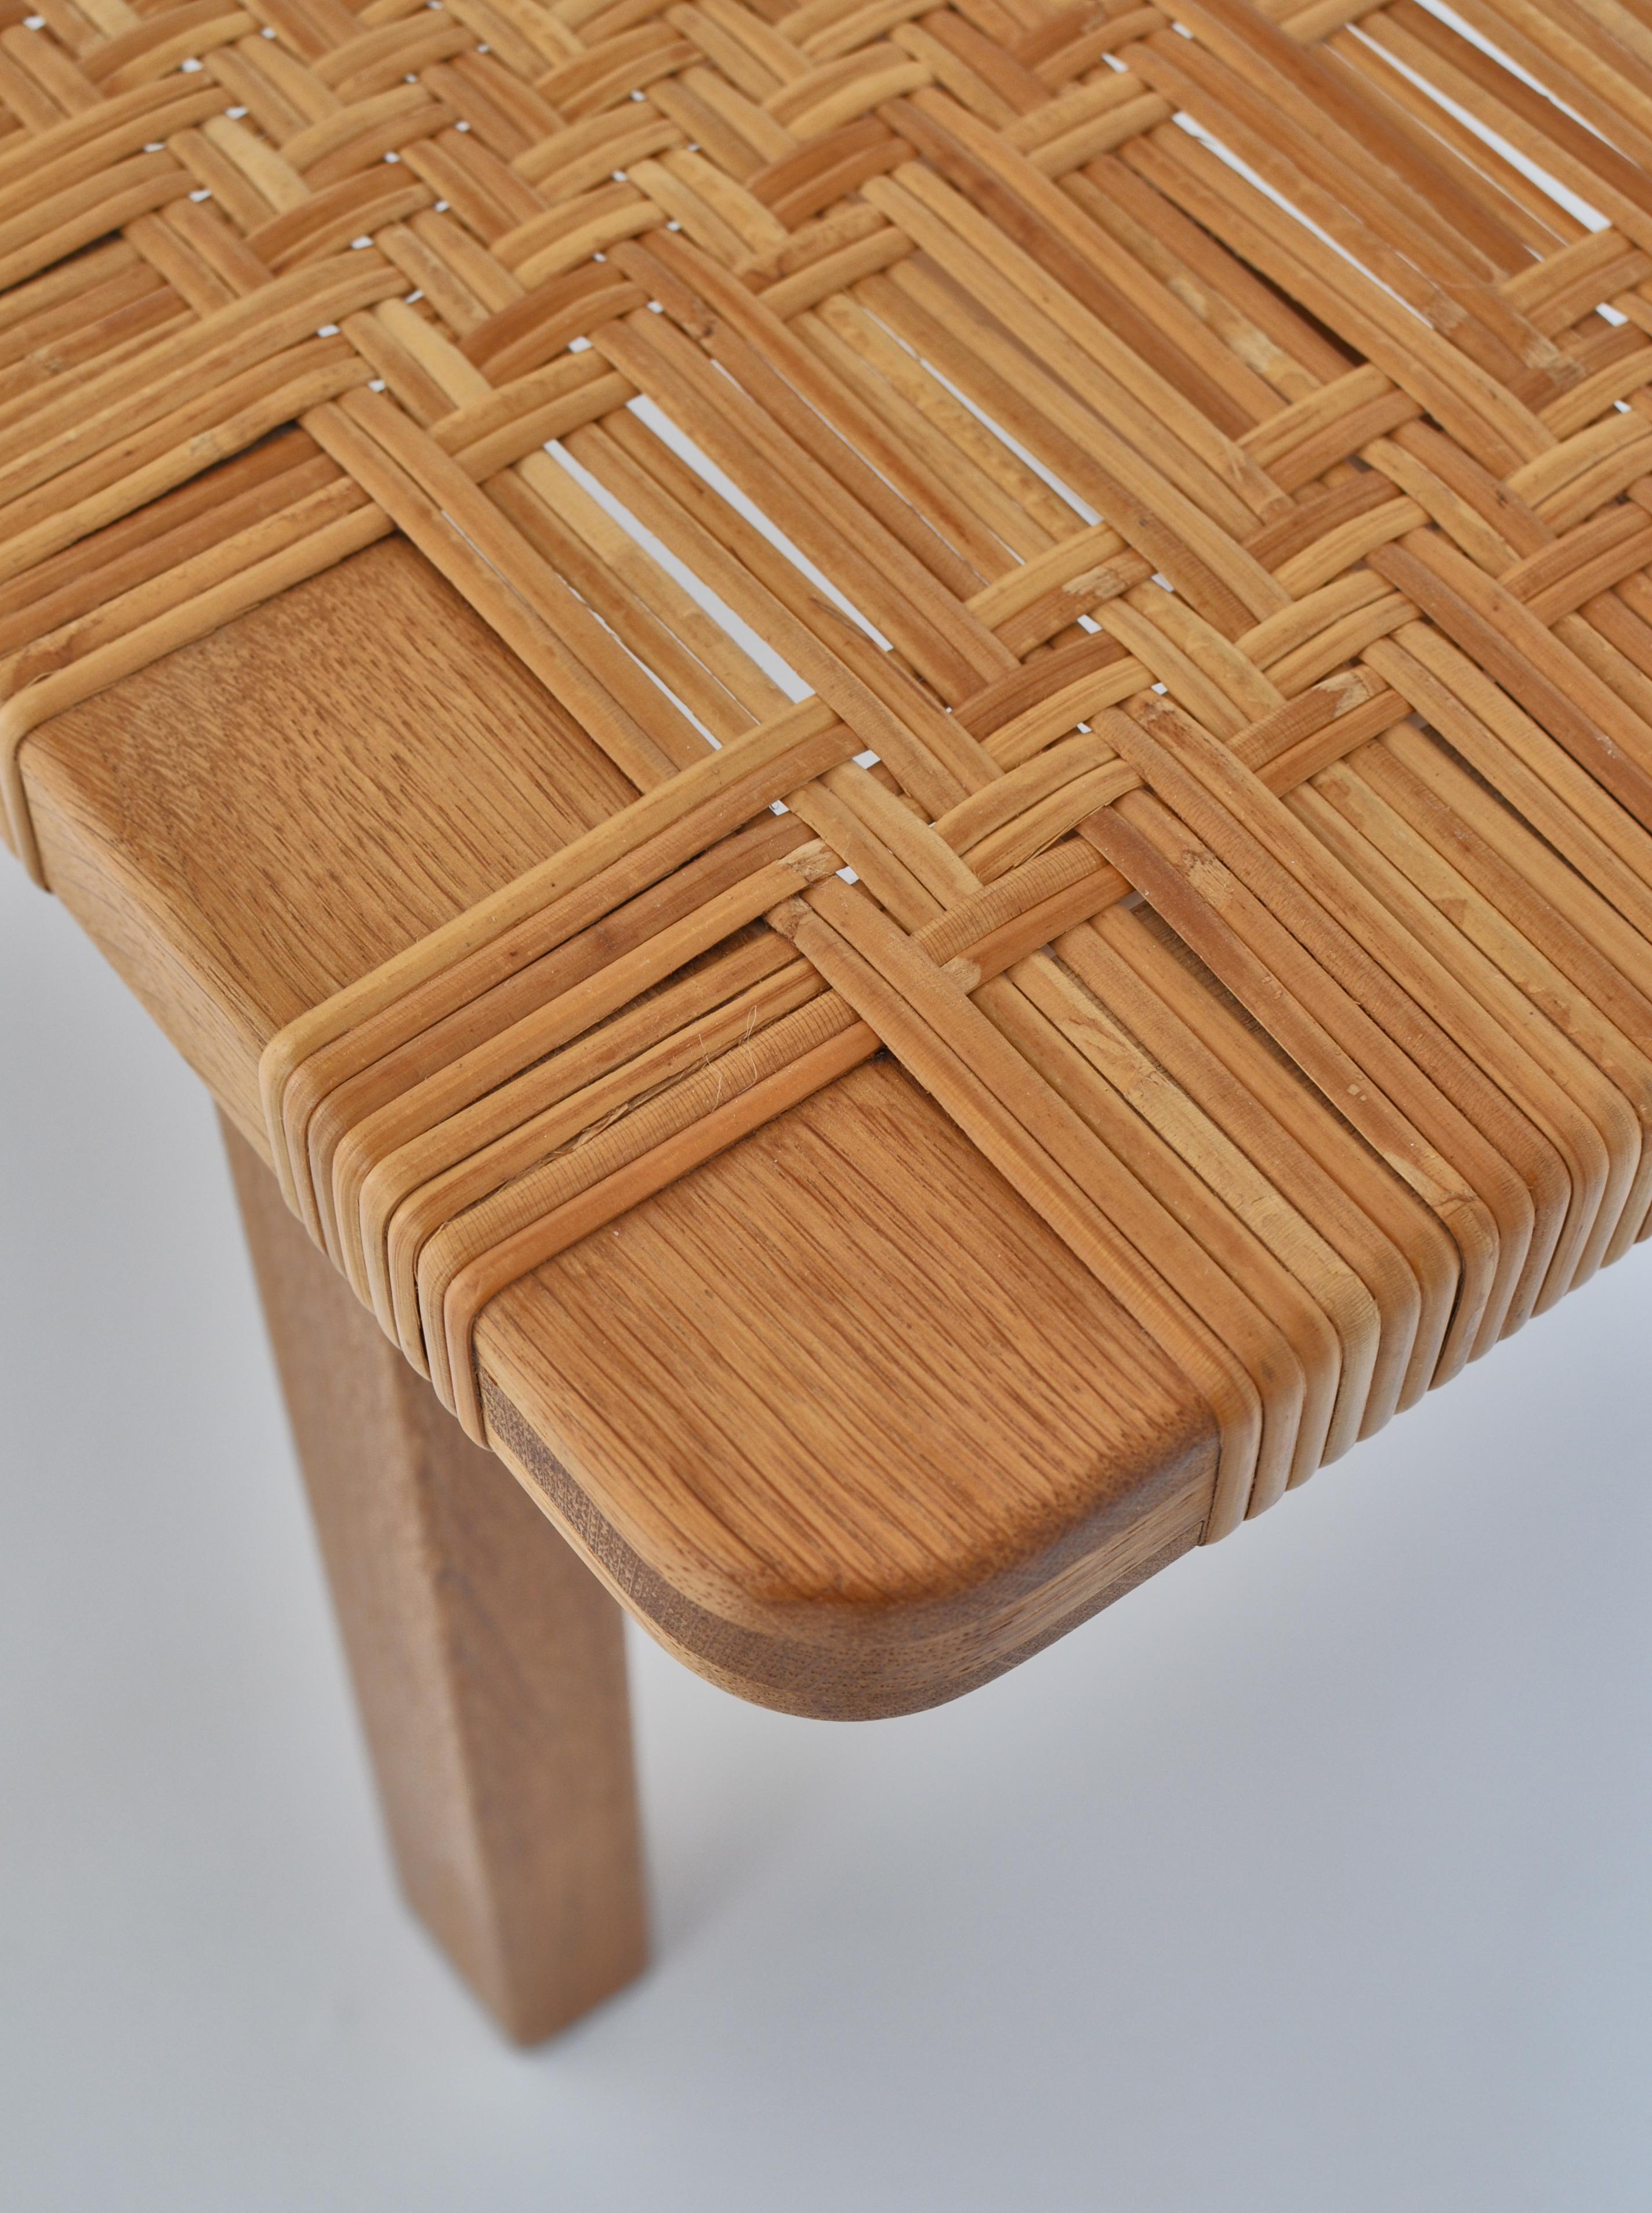 Borge Mogensen Side Tables or Benches in Oak and Rattan Cane, 1950s, Denmark 4